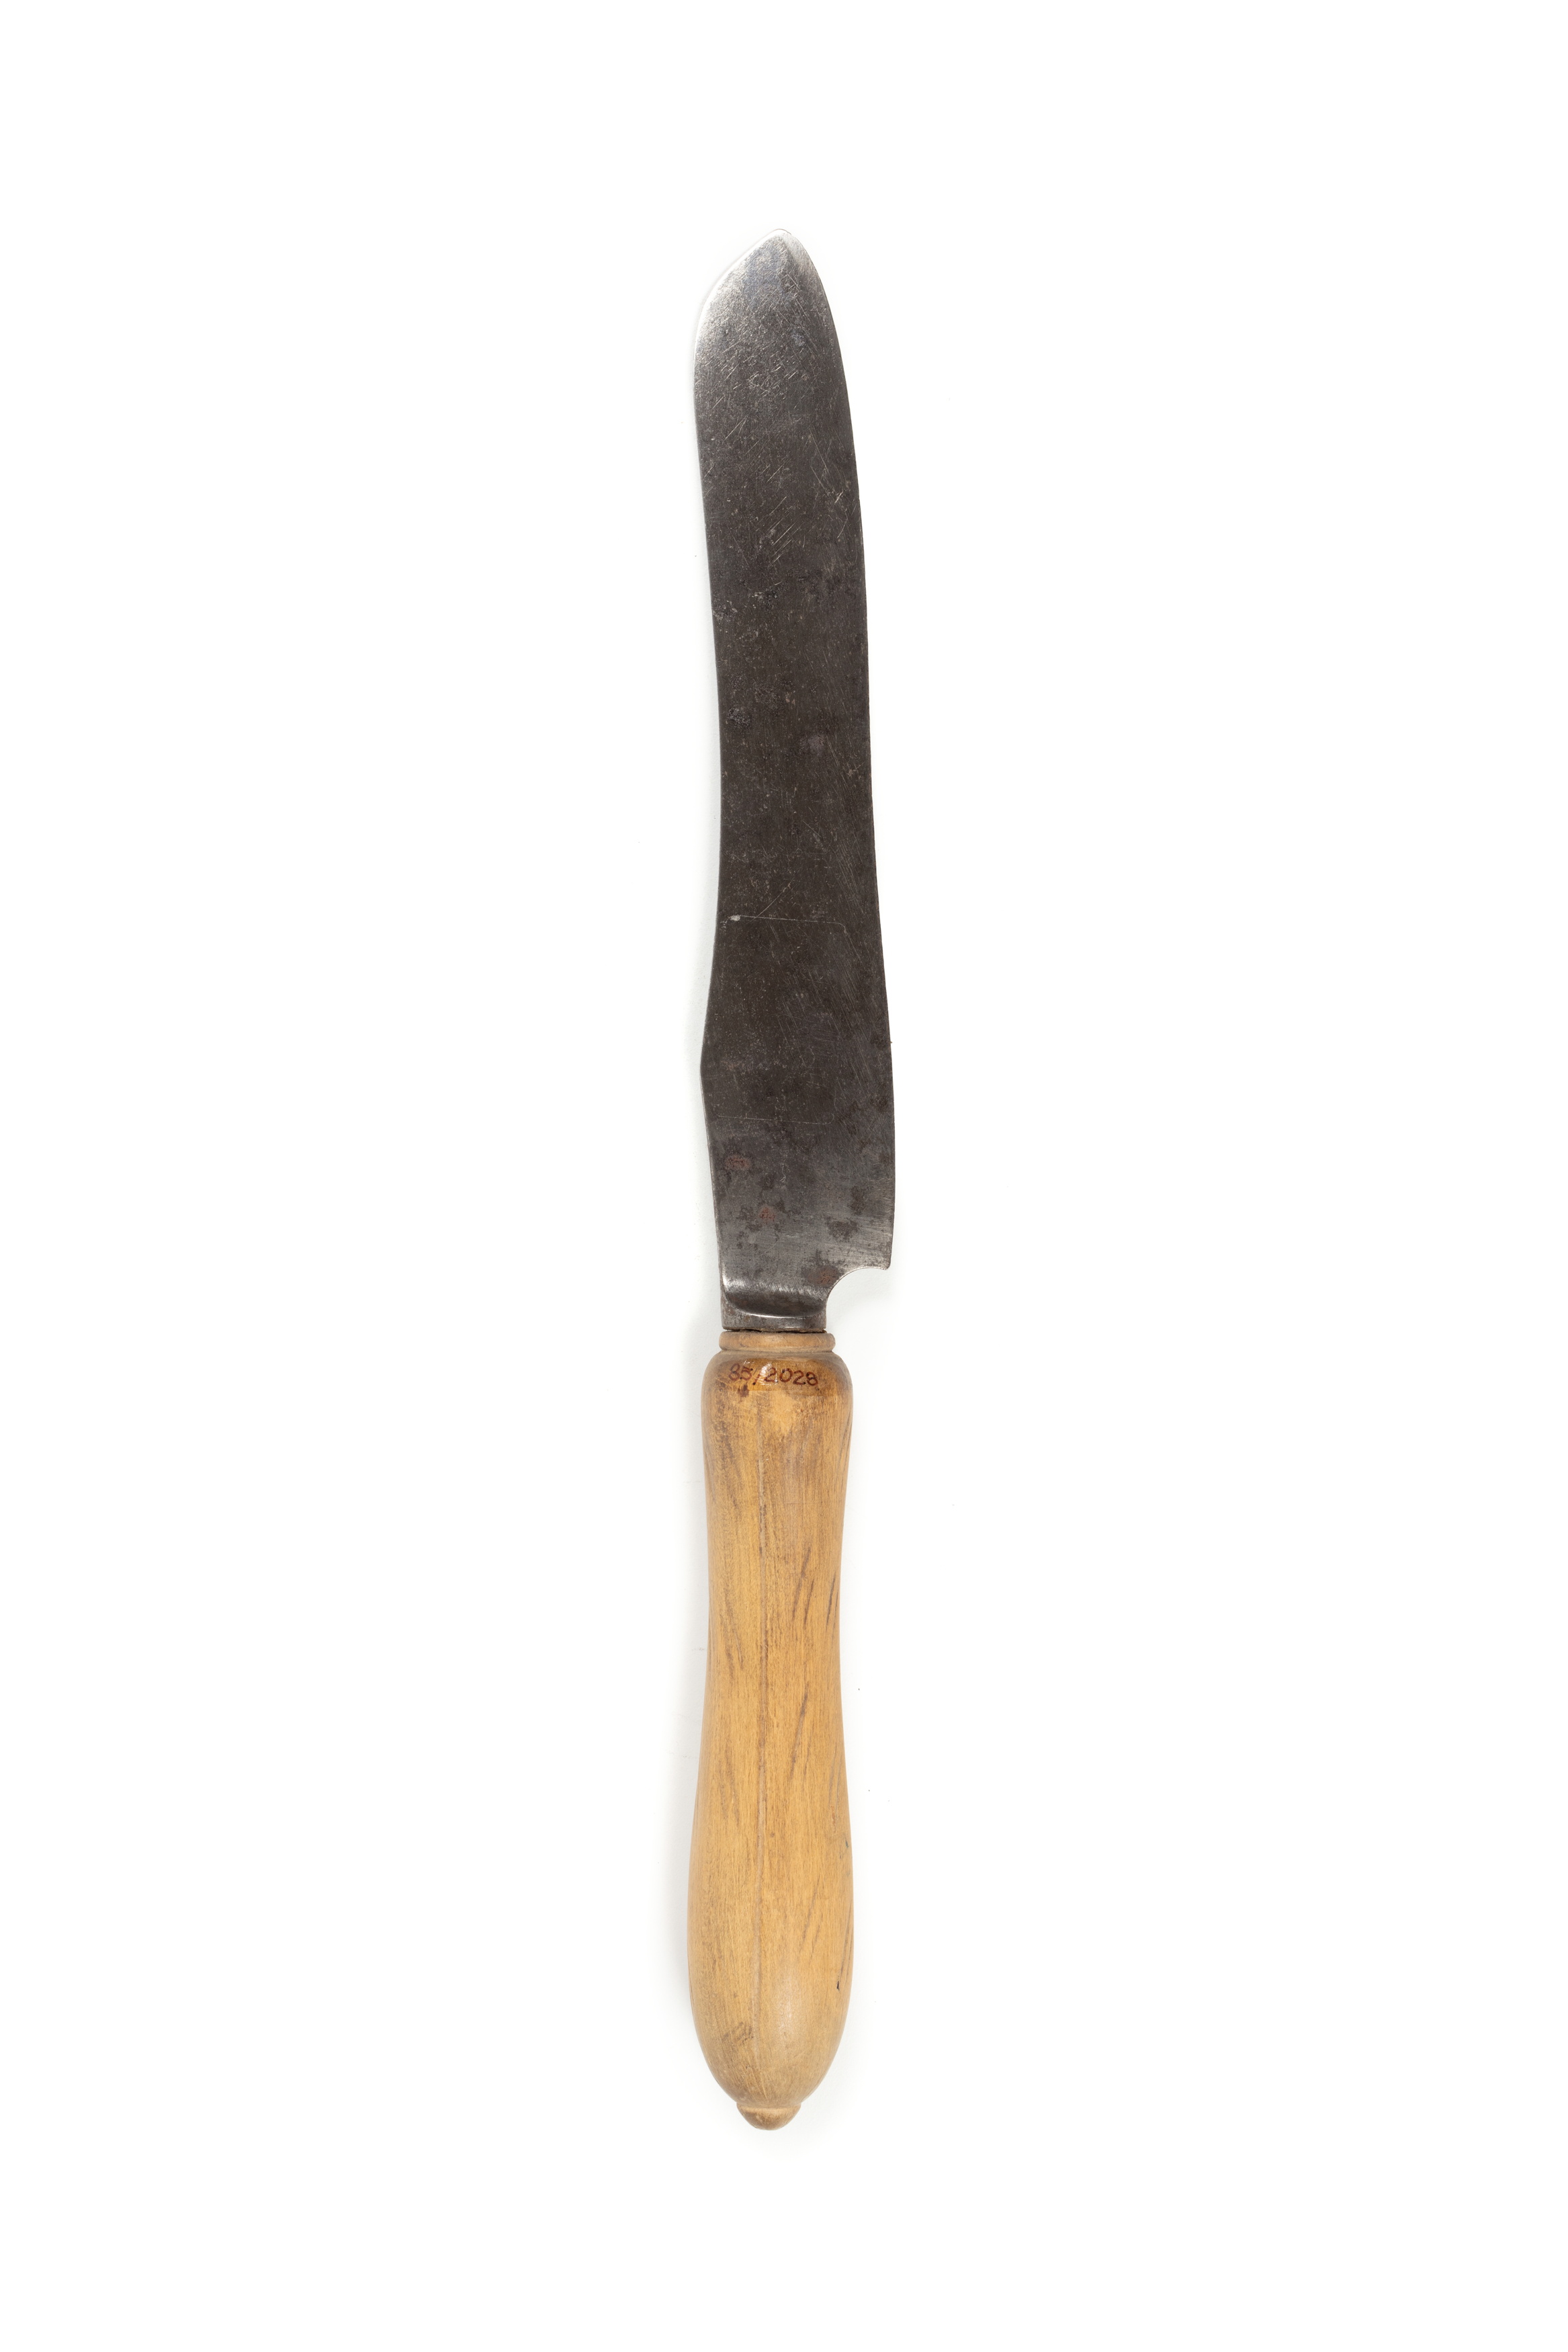 Bread knife by Joseph Rodgers & Sons